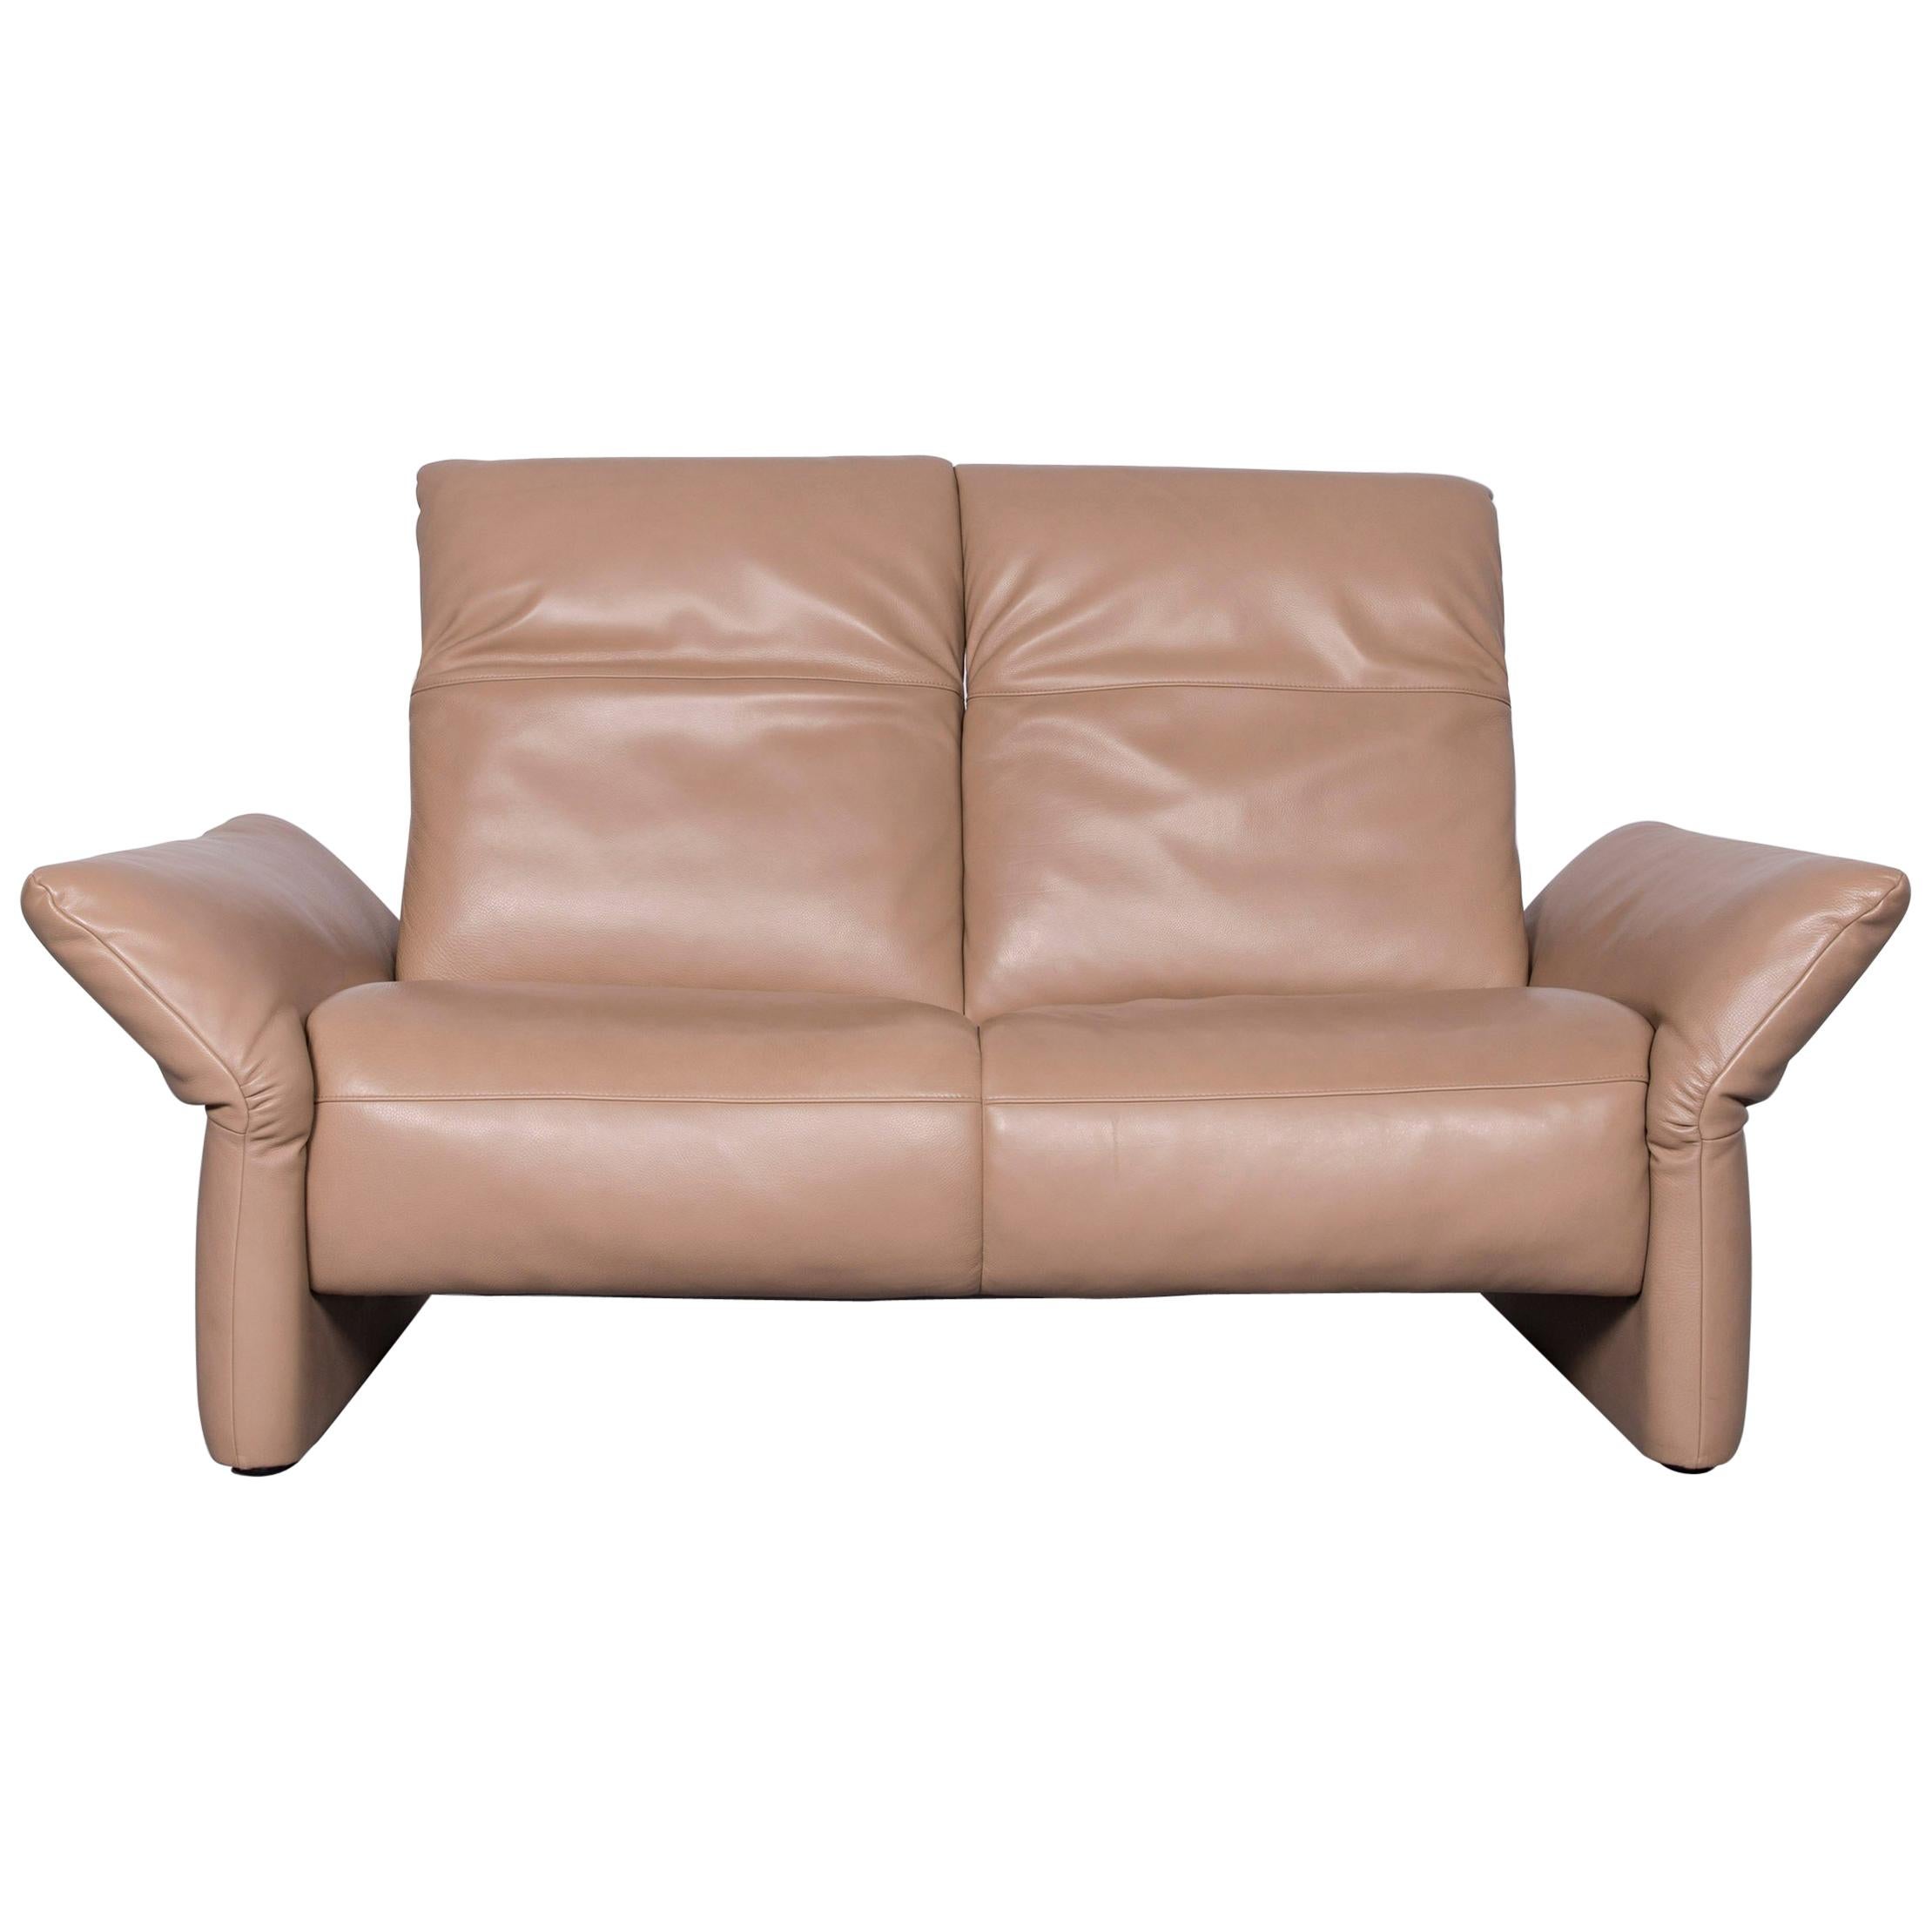 Koinor Elena Designer Two-Seat Sofa Beige Leather Function Couch For Sale